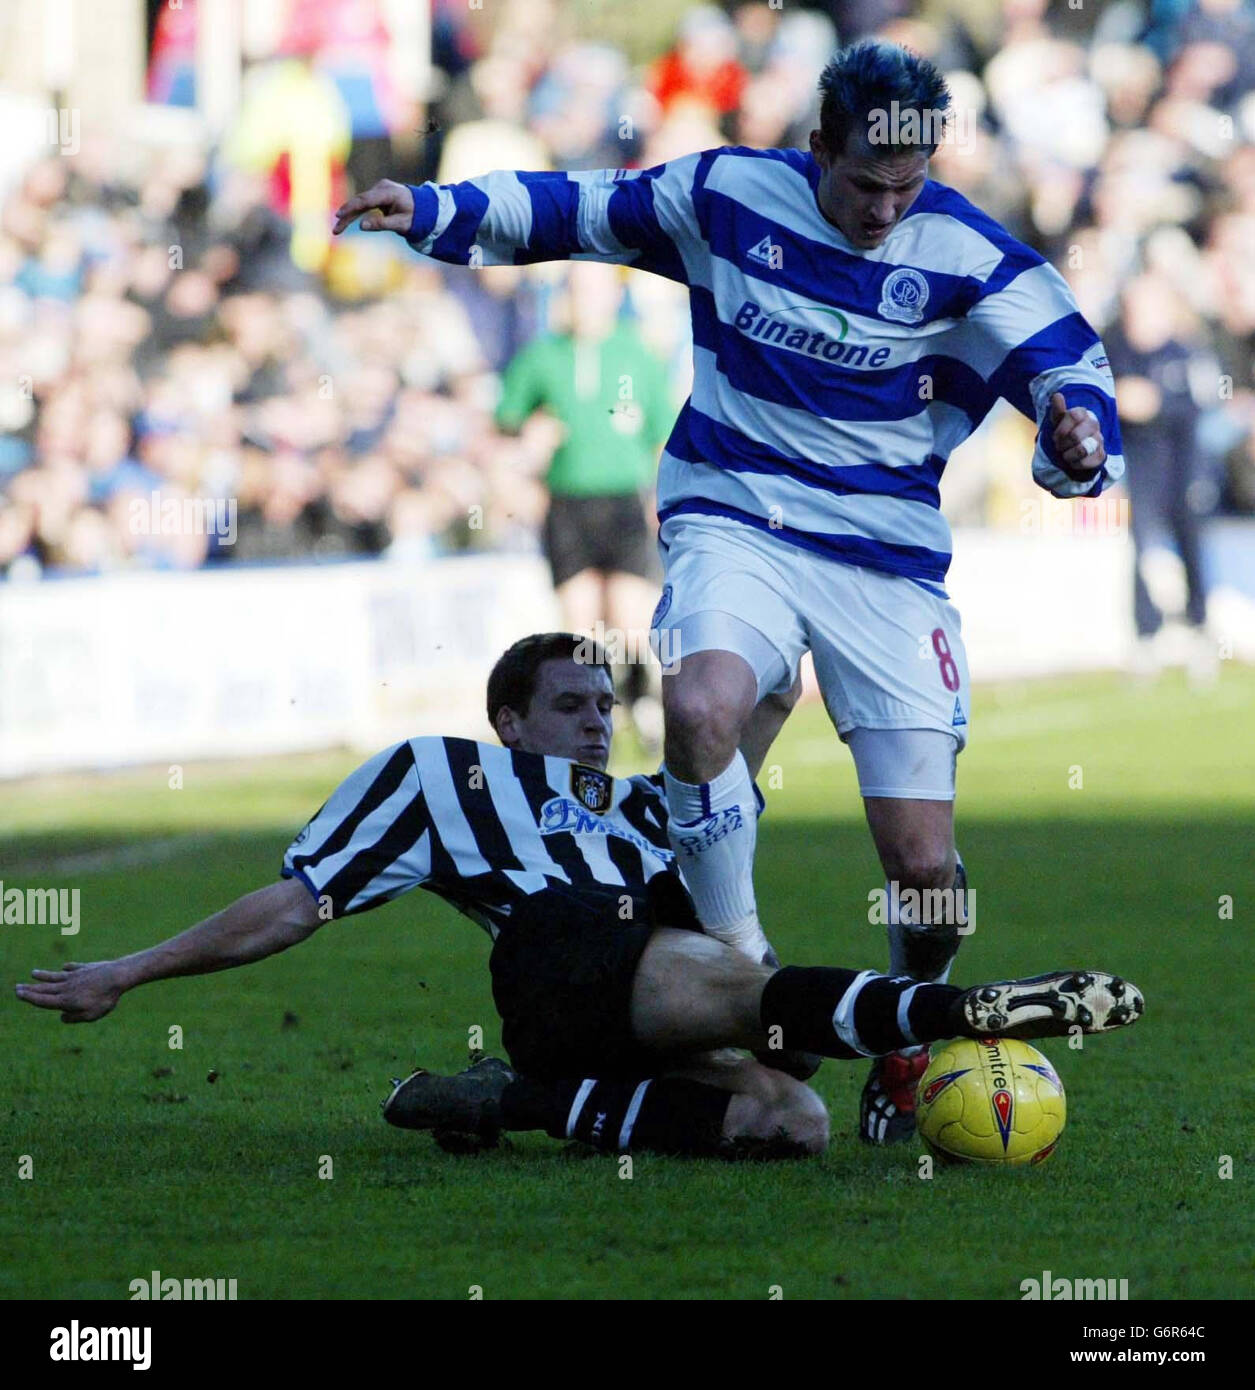 Notts County's Paul boertien (L) challenges QPR's Marc Bircham during the Nationwide Division Two match at Loftus Road, west London, Saturday 7 February, 2004. PA Photo: Mark Lees. . Stock Photo